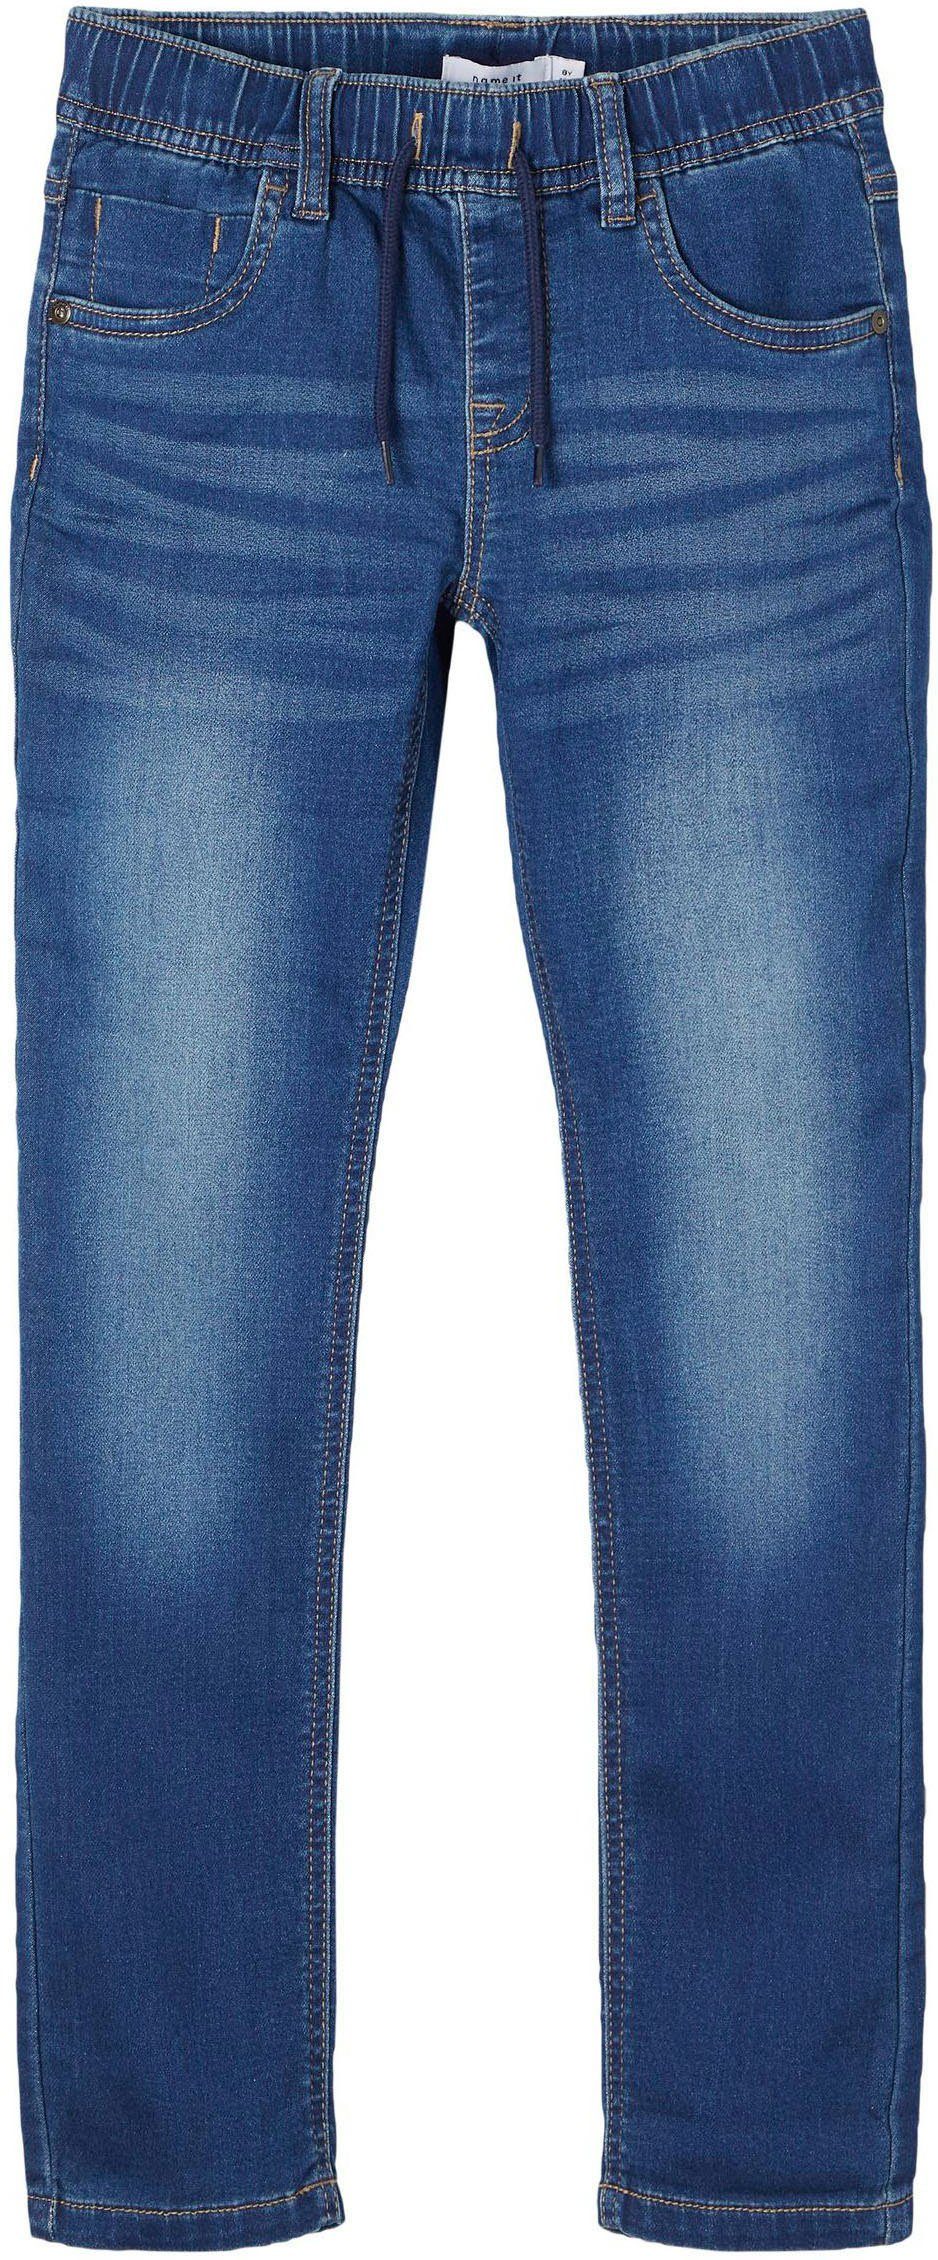 DNMTHAYERS It Name NKMROBIN Stretch-Jeans 3454